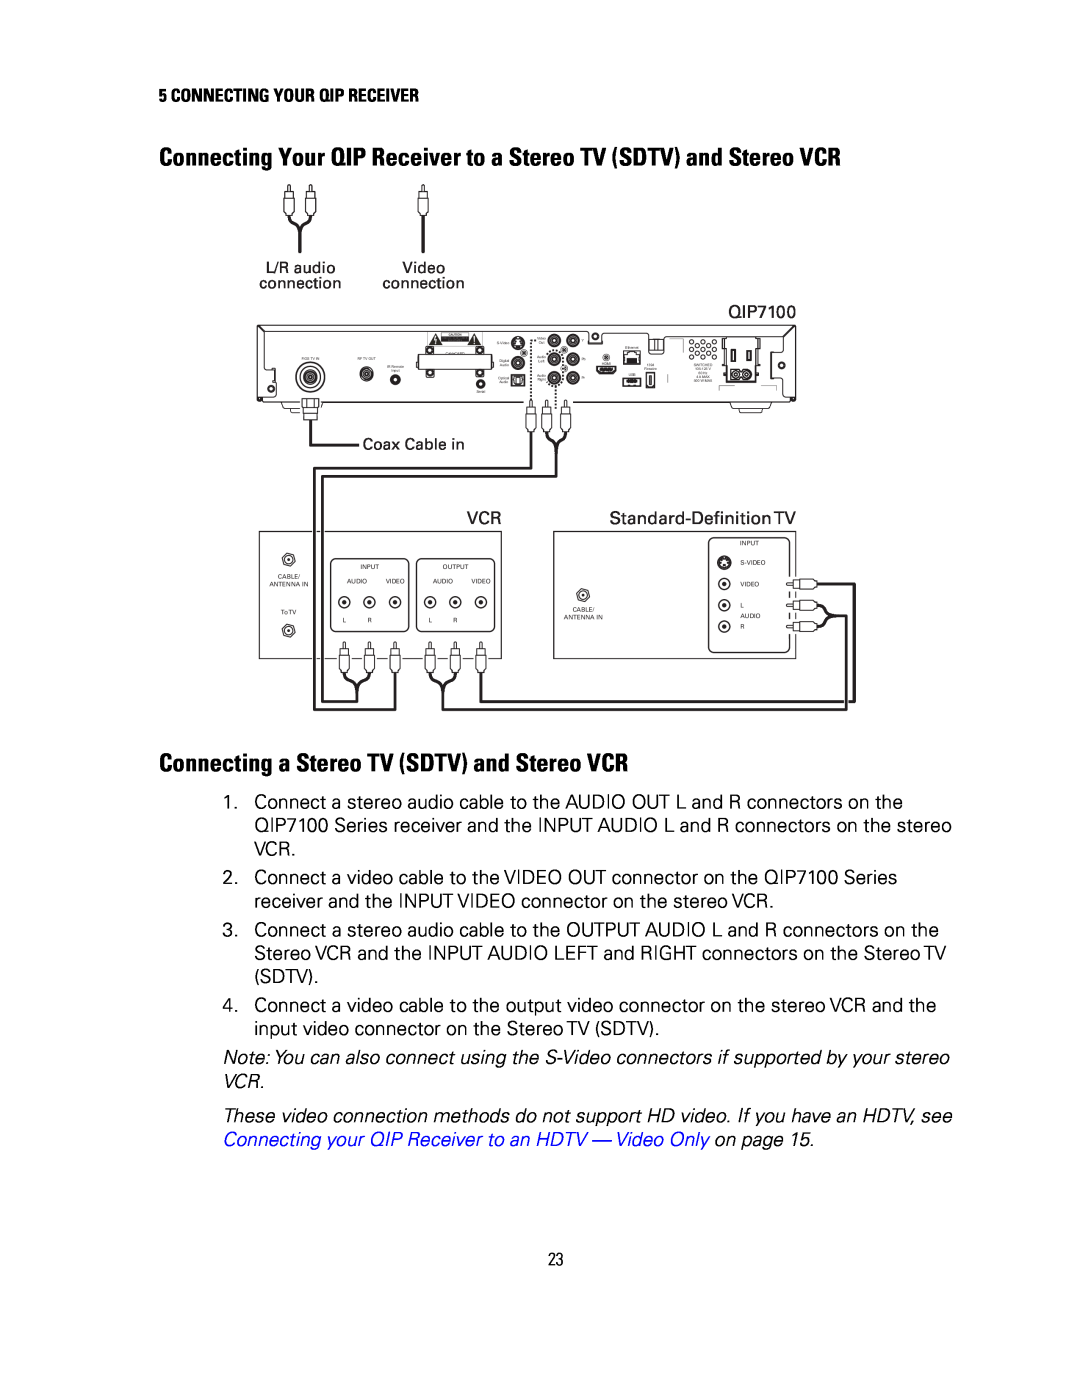 Motorola QIP7100 operation manual Connecting Your QIP Receiver to a Stereo TV SDTV and Stereo VCR 